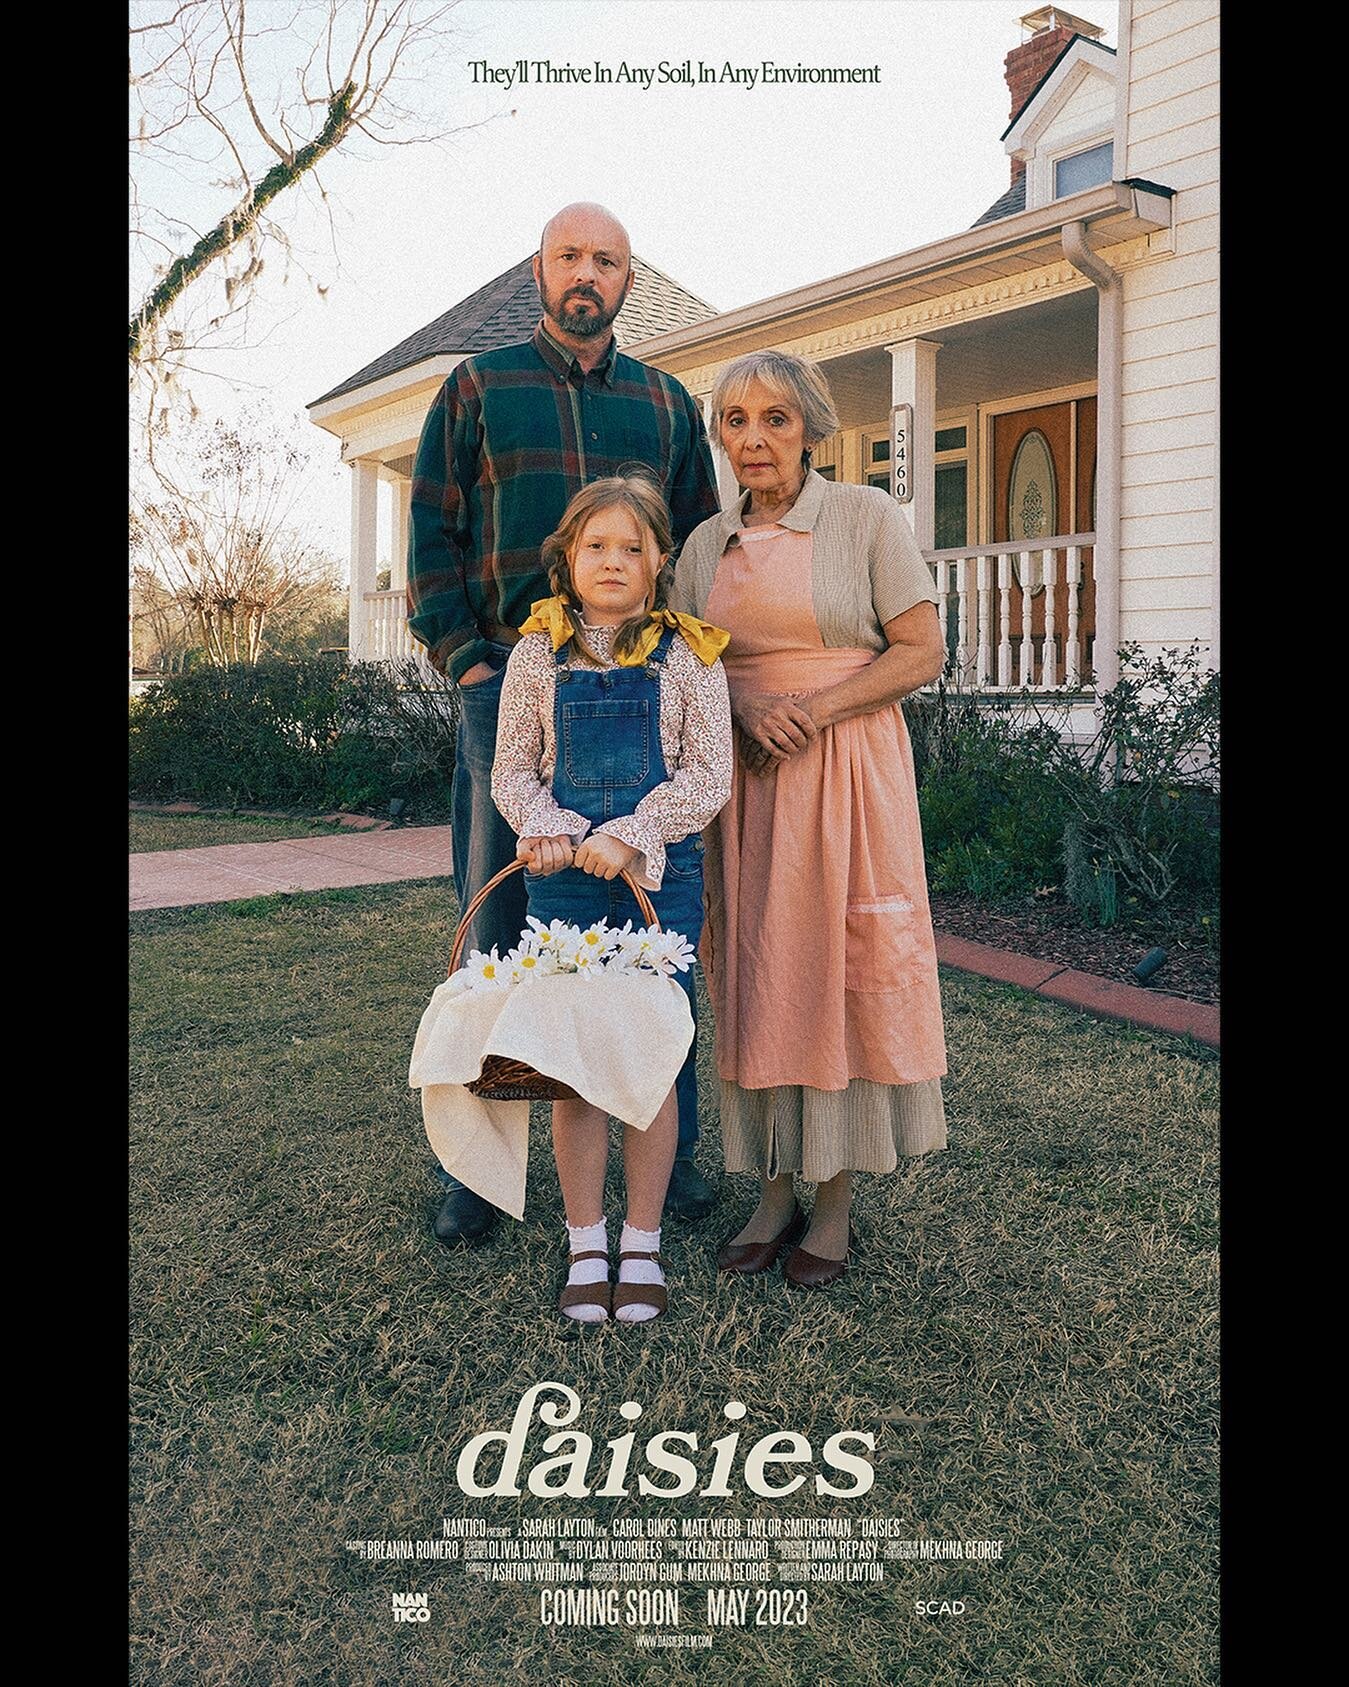 It&rsquo;s finally here. Don&rsquo;t miss the official premiere of Daisies&mdash;tomorrow at the Trustees Theater, 9:00 a.m.

📸 @alessamaiuri